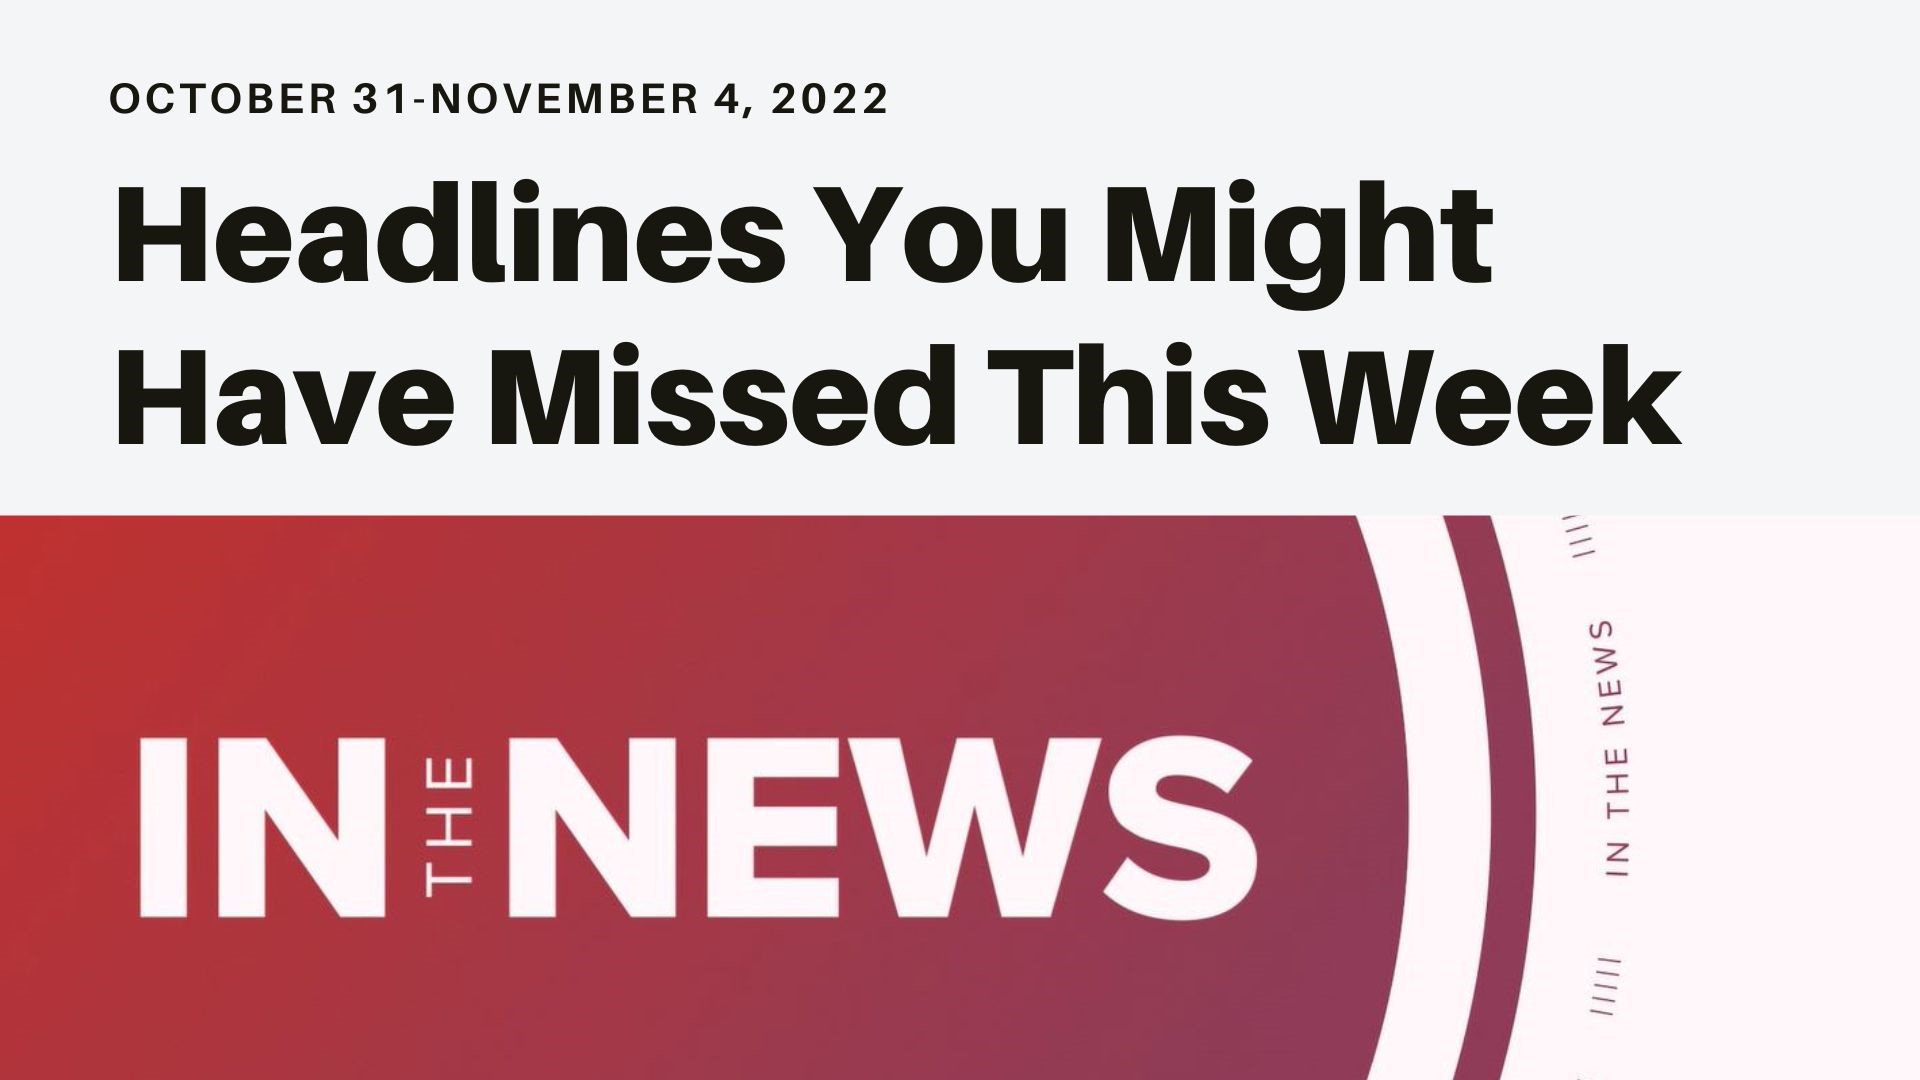 A look at some of the headlines you  might have missed from this week including the Powerball jackpot growing, Parkland school shooter sentenced and Twitter changes.